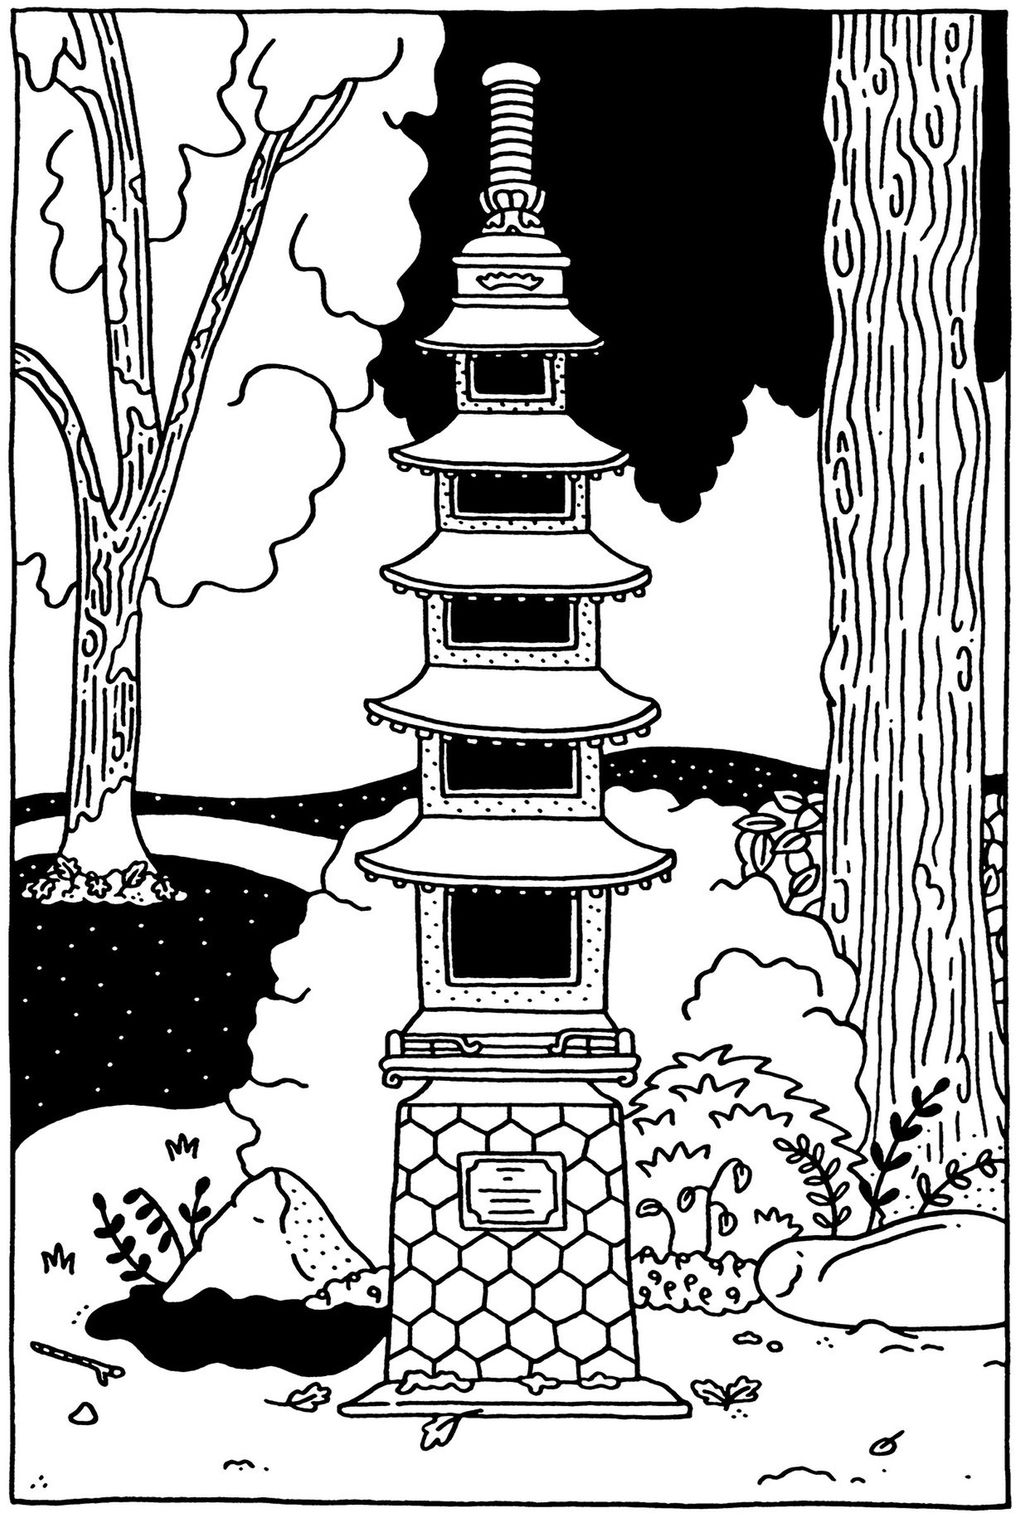 This 6-ton granite stone lantern was gifted by Kojiro Matsukata of Kobe, Japan, to the city of Seattle in 1911. It stands today in Mount Baker Park.  (Susanna Ryan / Special to The Seattle Times)